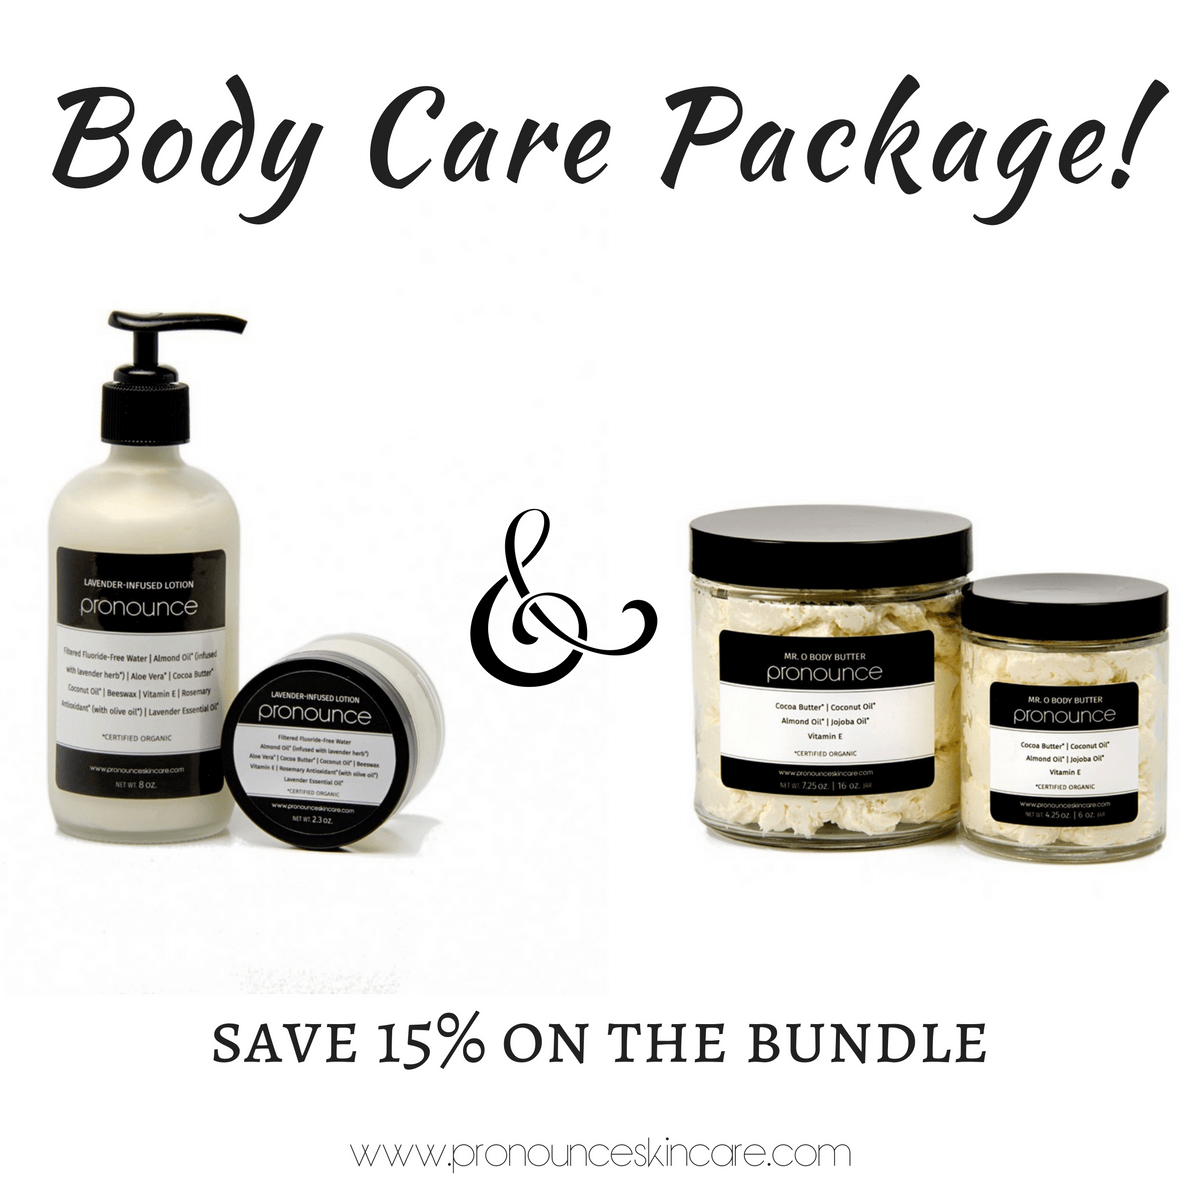 Body Care Package! Lavender-Infused Lotion + Body Butter. Bundle together by size and scent and save 15%!- Pronounce Skincare & Apothecary-2